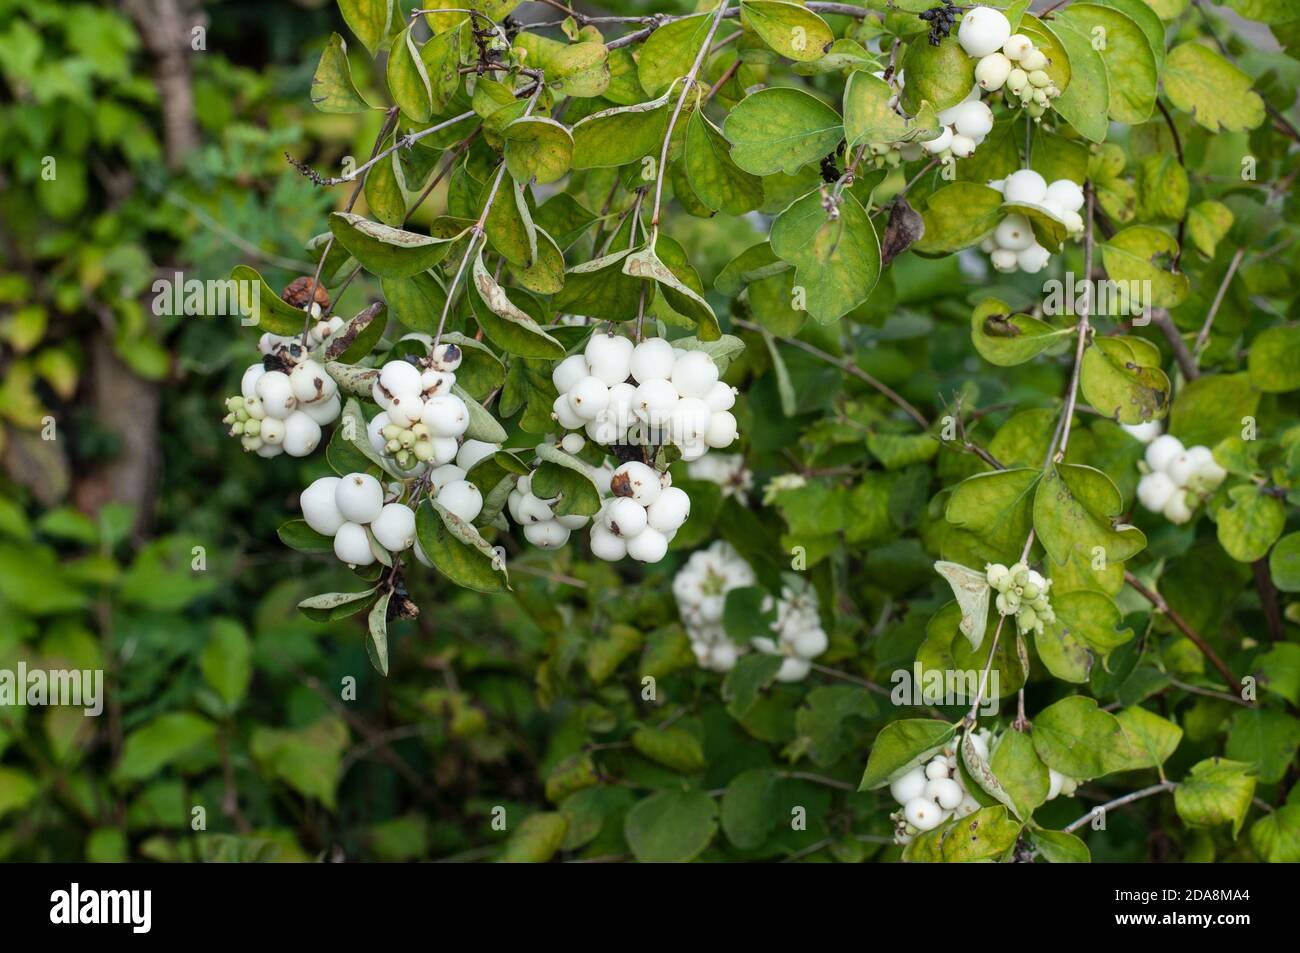 twigs of a snowberry shrub, an ornamental deciduous plant with poisonous white berries Stock Photo